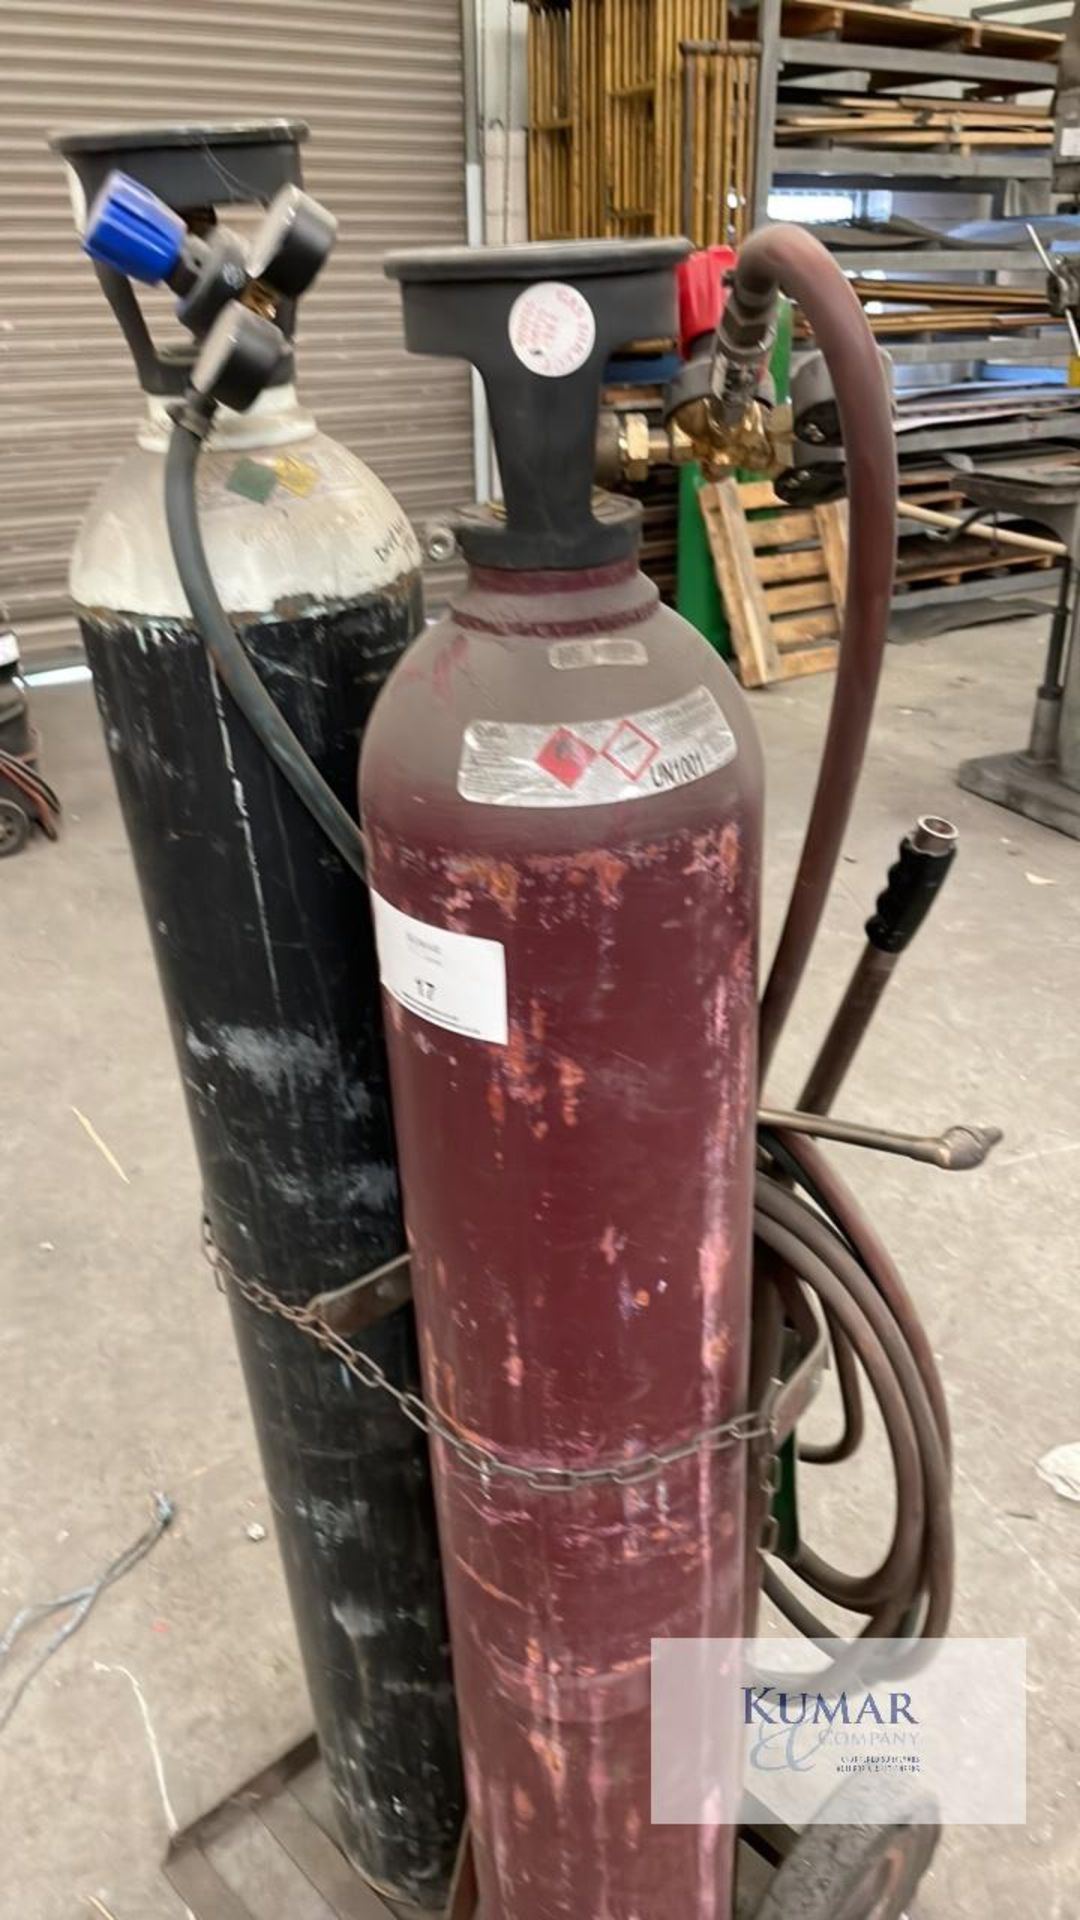 Oxyacetylene Cutting Torch and Gauges Mounted on Trolley - Does Not Include Gas Bottles As Shown - Image 2 of 3